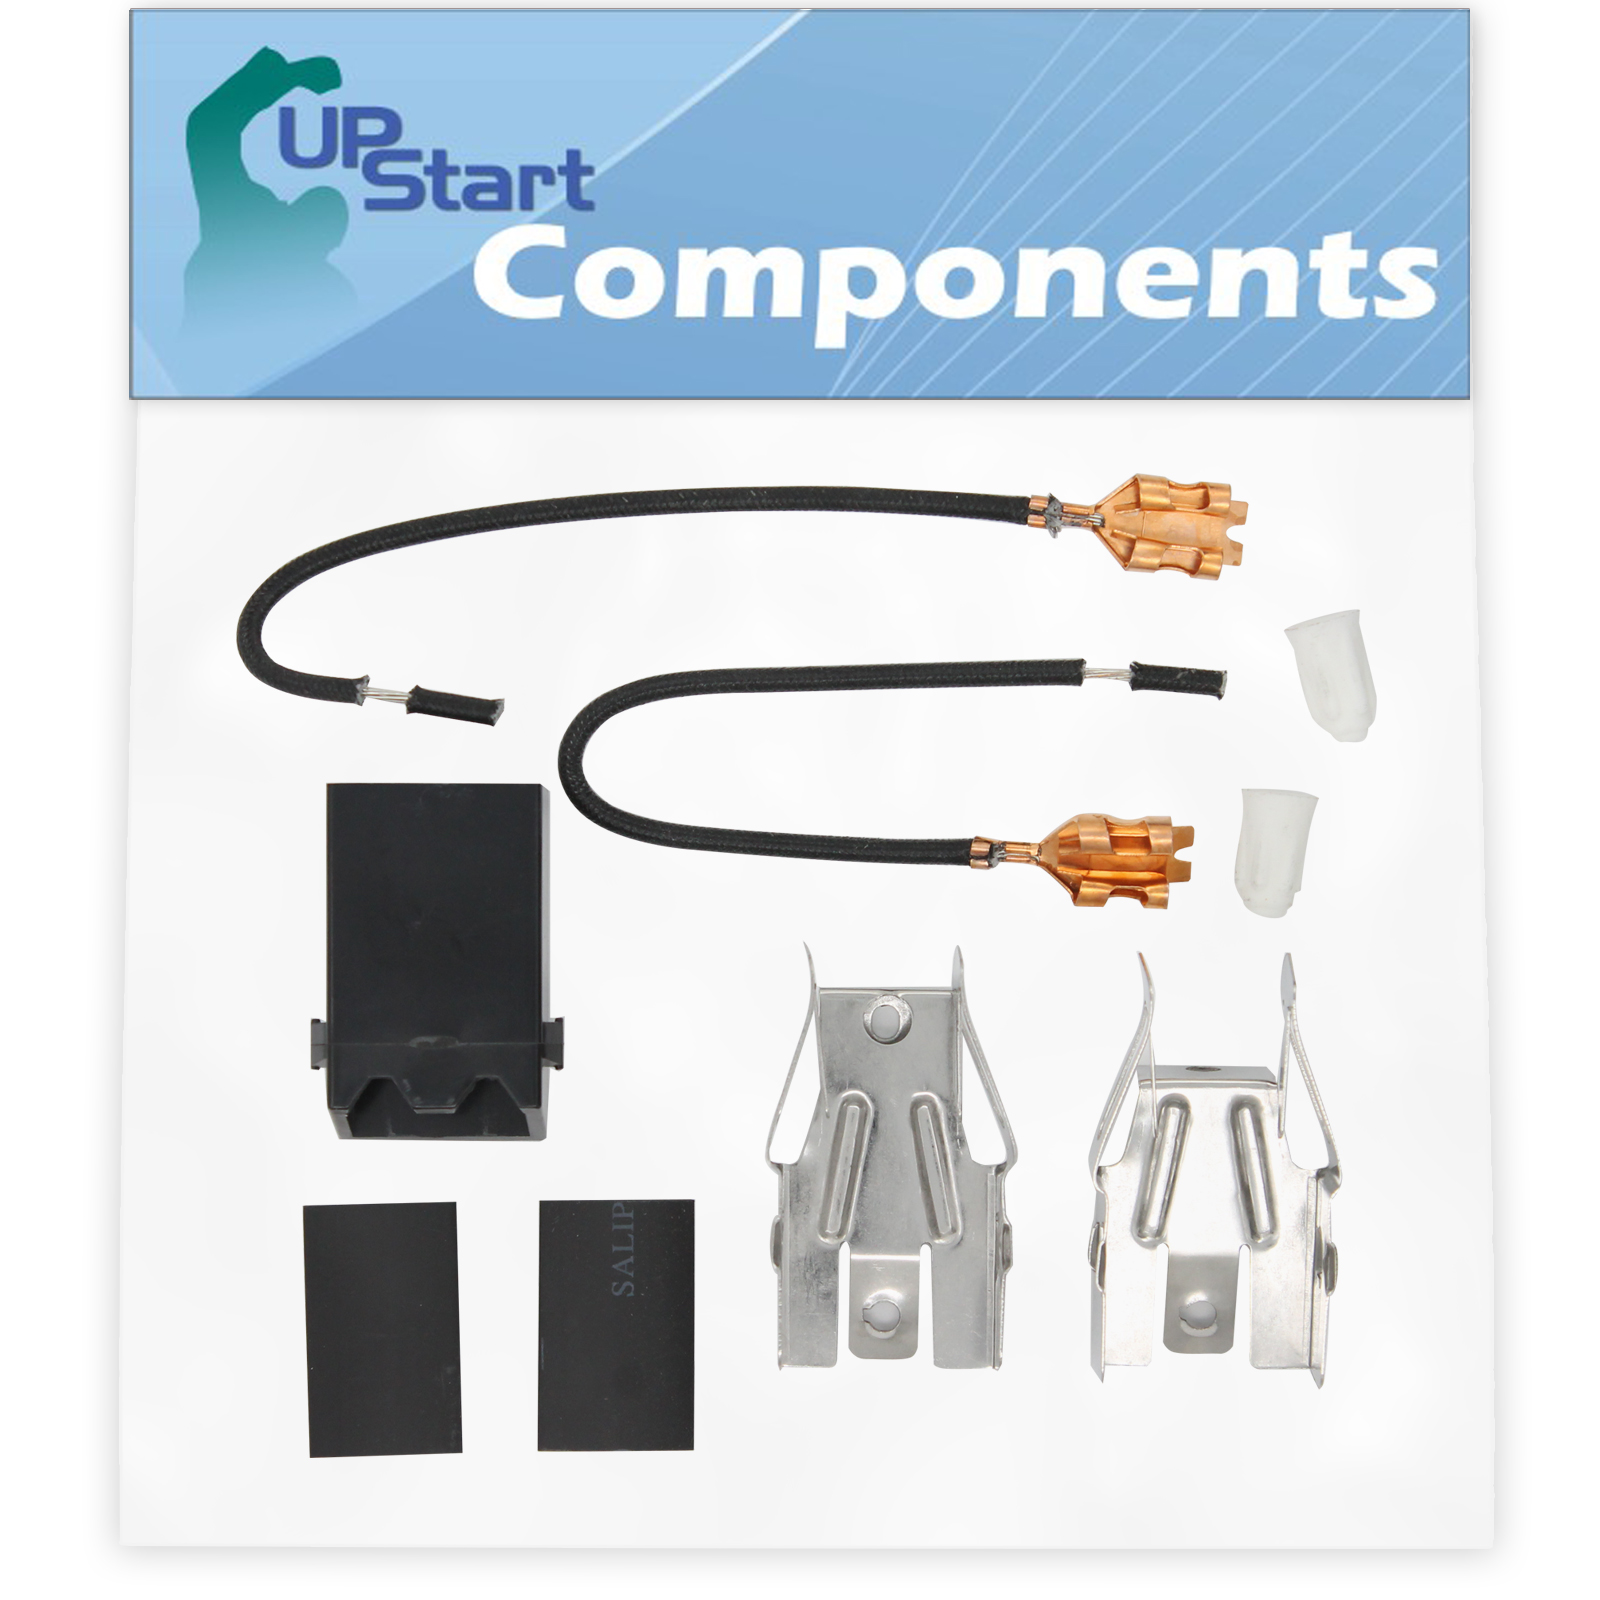 330031 Top Burner Receptacle Kit Replacement for Amana SBE26DC Range/Cooktop/Oven - Compatible with 330031 Range Burner Receptacle Kit - UpStart Components Brand - image 1 of 4